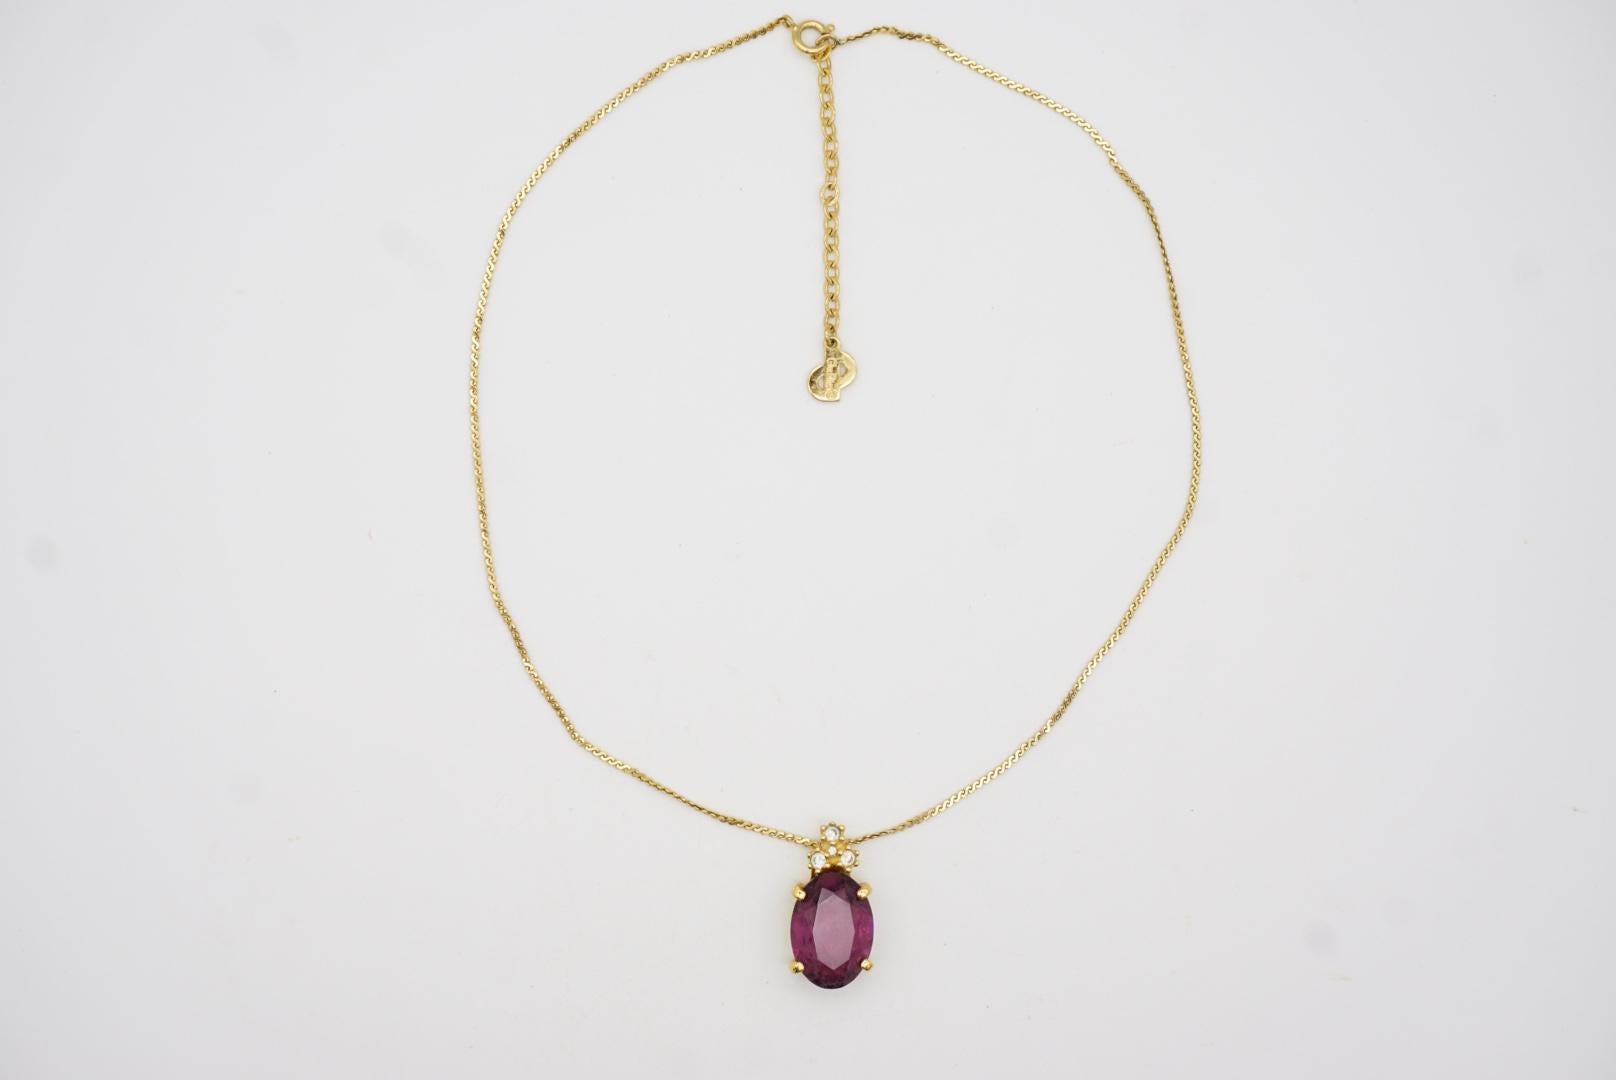 Christian Dior Vintage 1980s Amethyst Purple Oval Crystals Gold Pendant Necklace For Sale 3